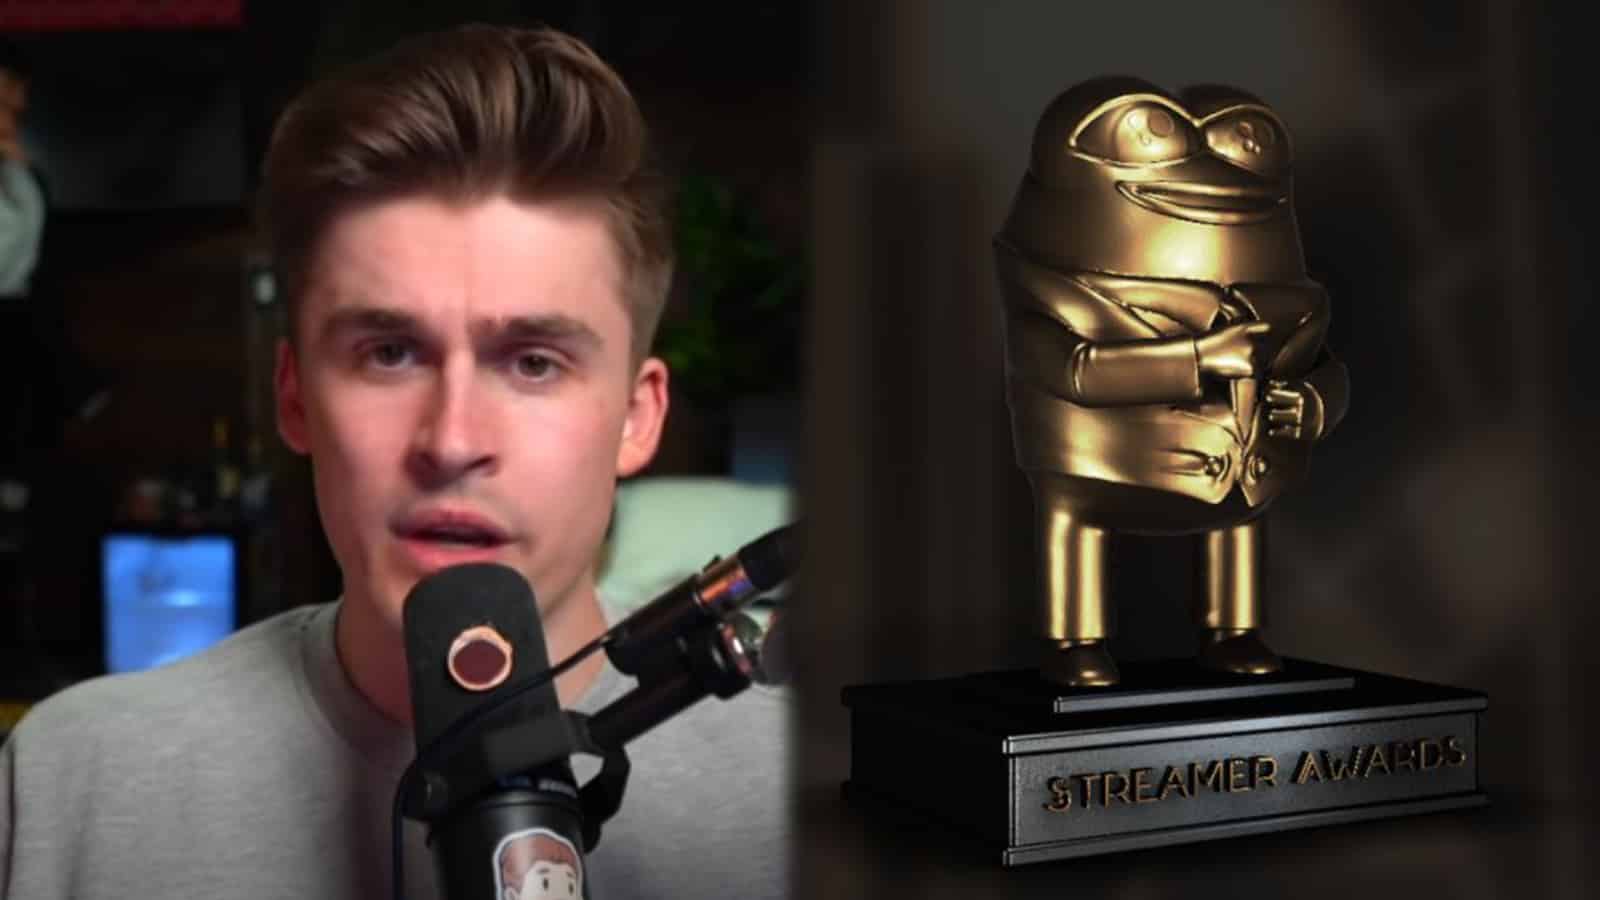 YouTuber Ludwig next to the Streamer Awards trophy screenshot.